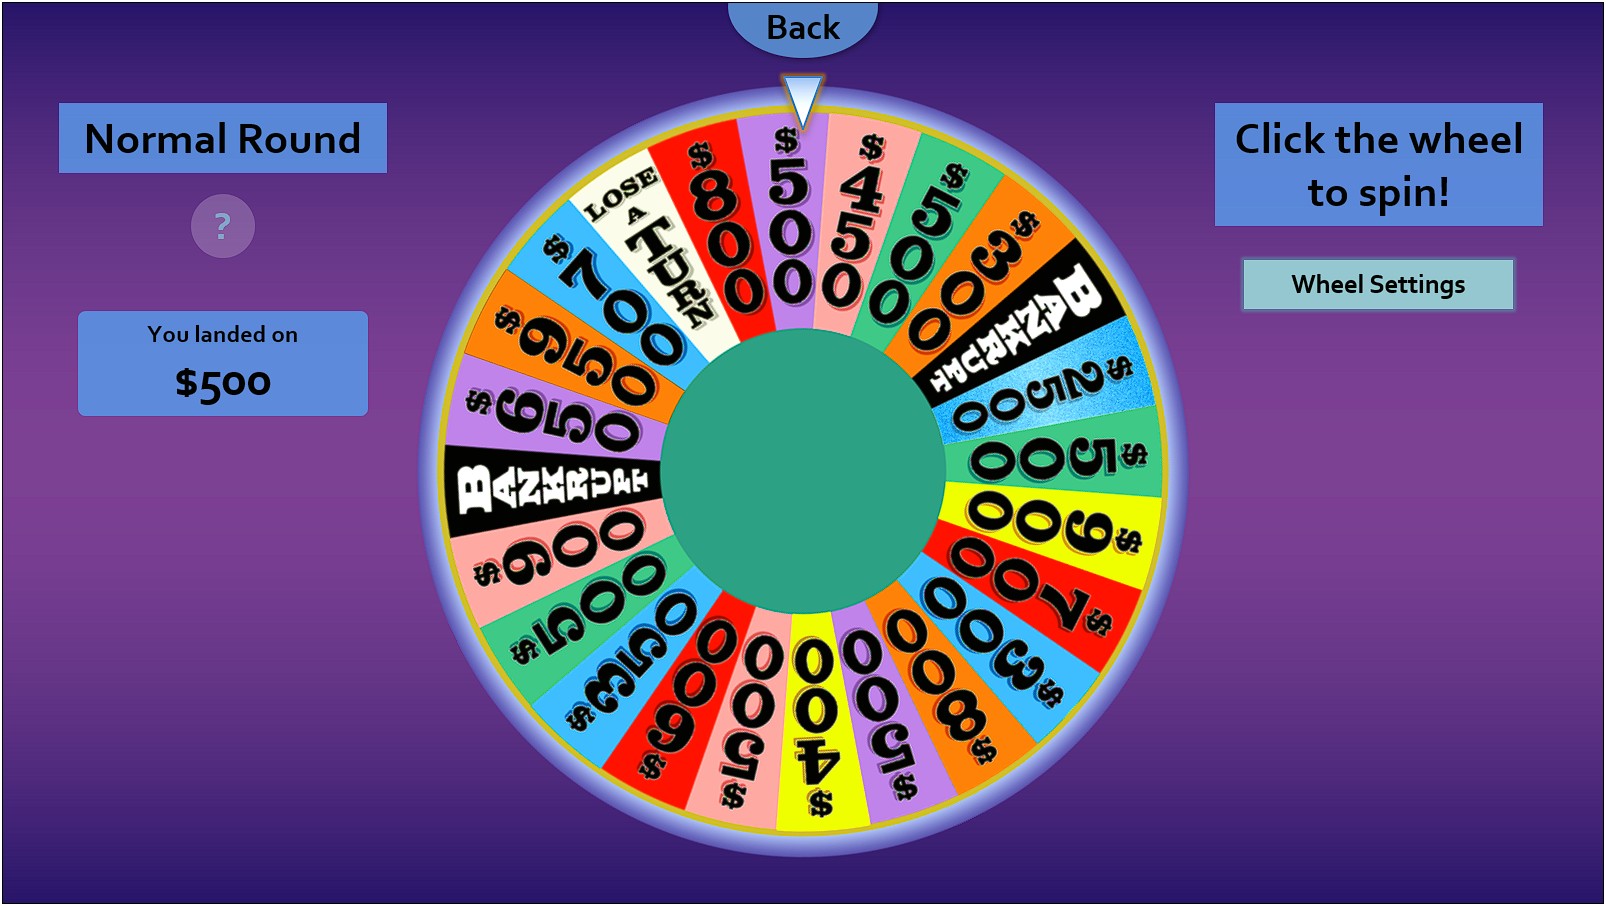 Wheel Of Fortune Template Google Slides Free